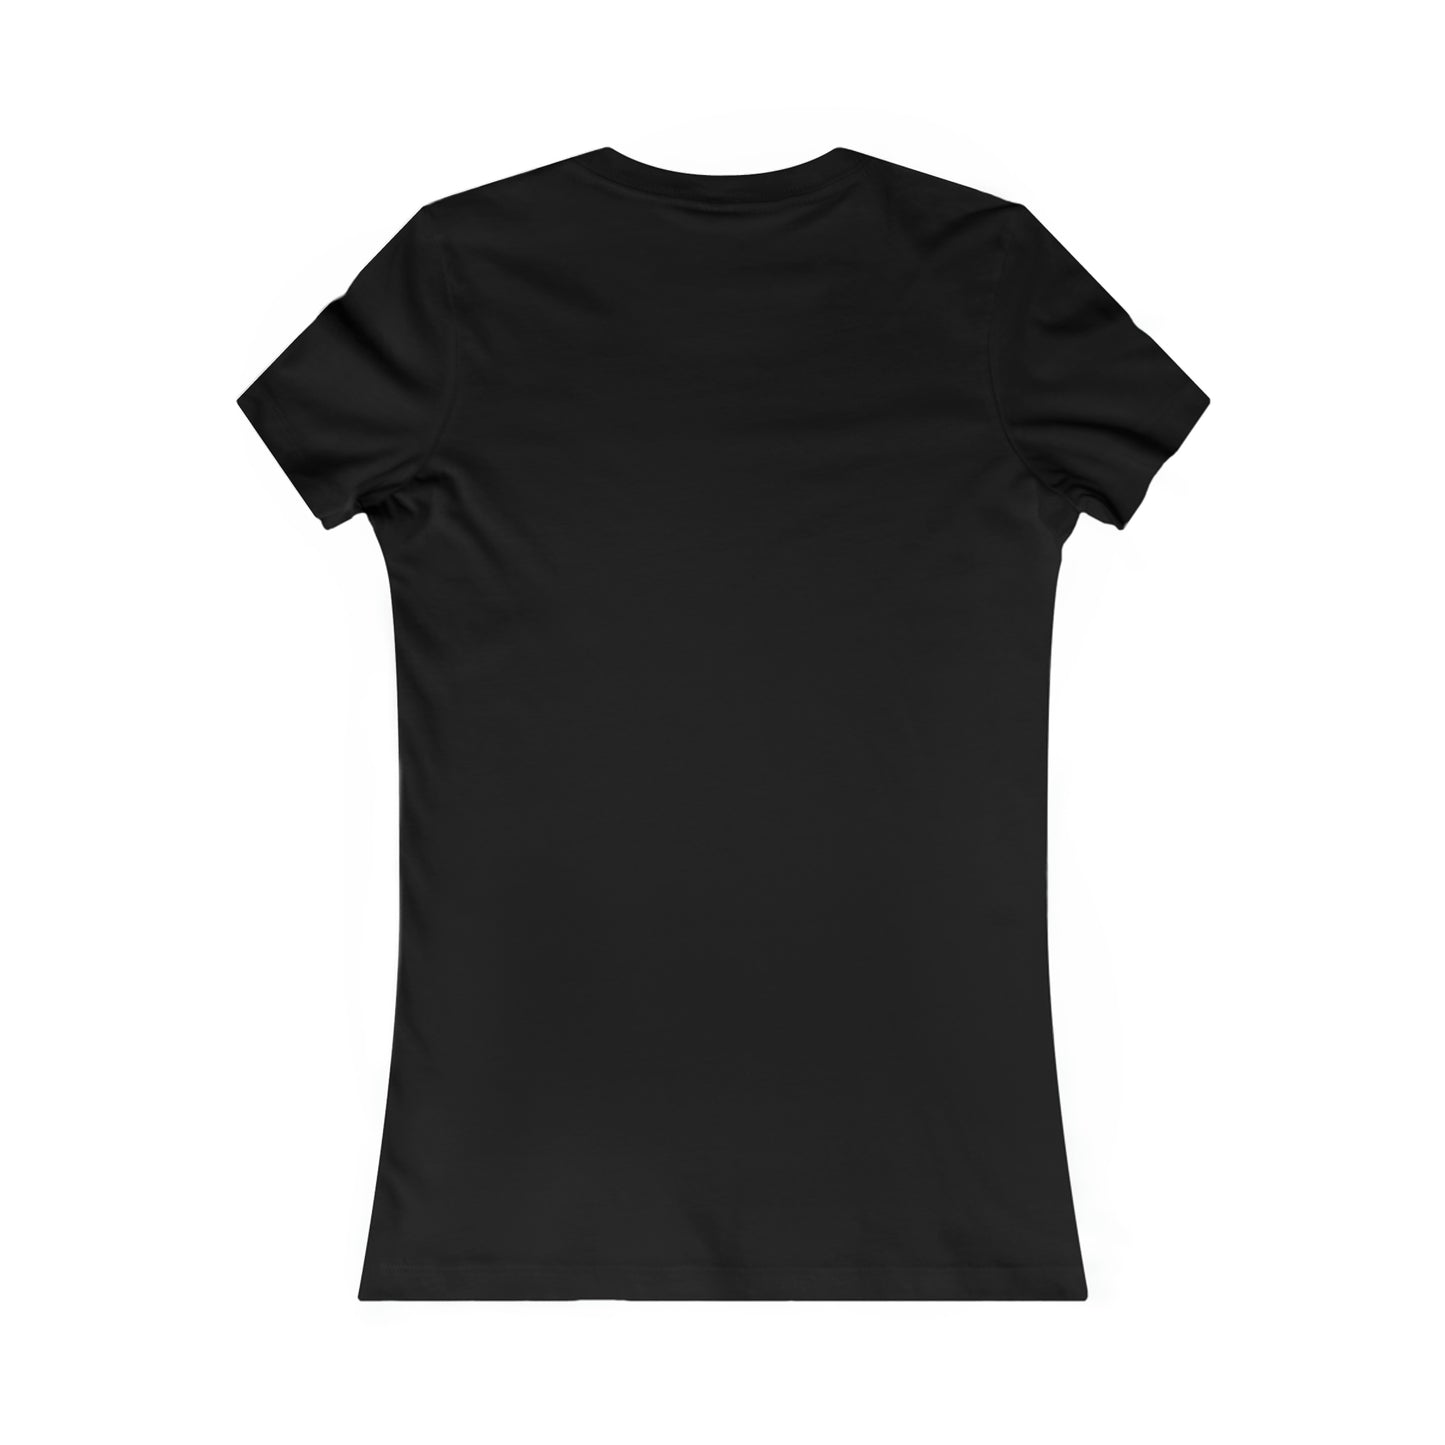 Cat lovers understand this “Catitude Central” Women's Favorite Tee. Available in several colors for you to choose from. Slim fit so please check the size table.